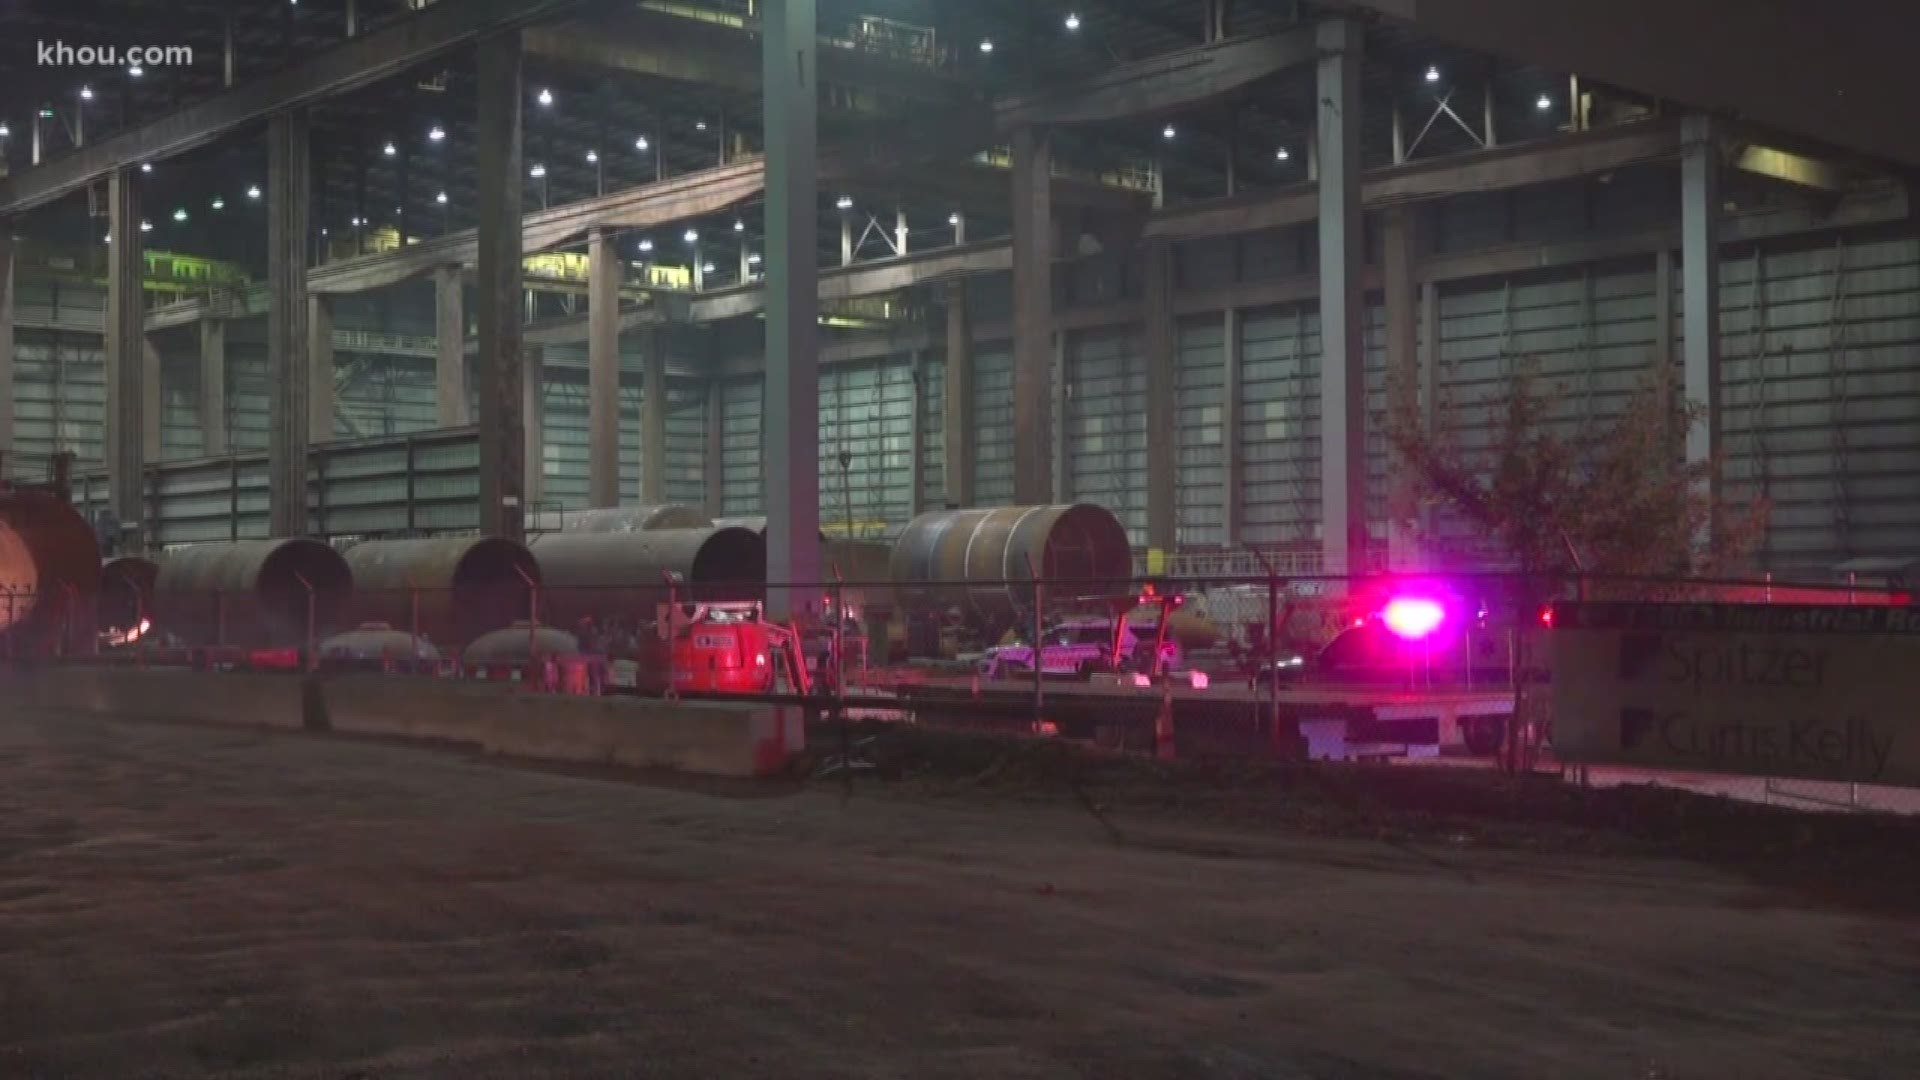 KHOU 11's Janel Forte reports on another industrial incident in the Houston area - this one taking the lives of two men.